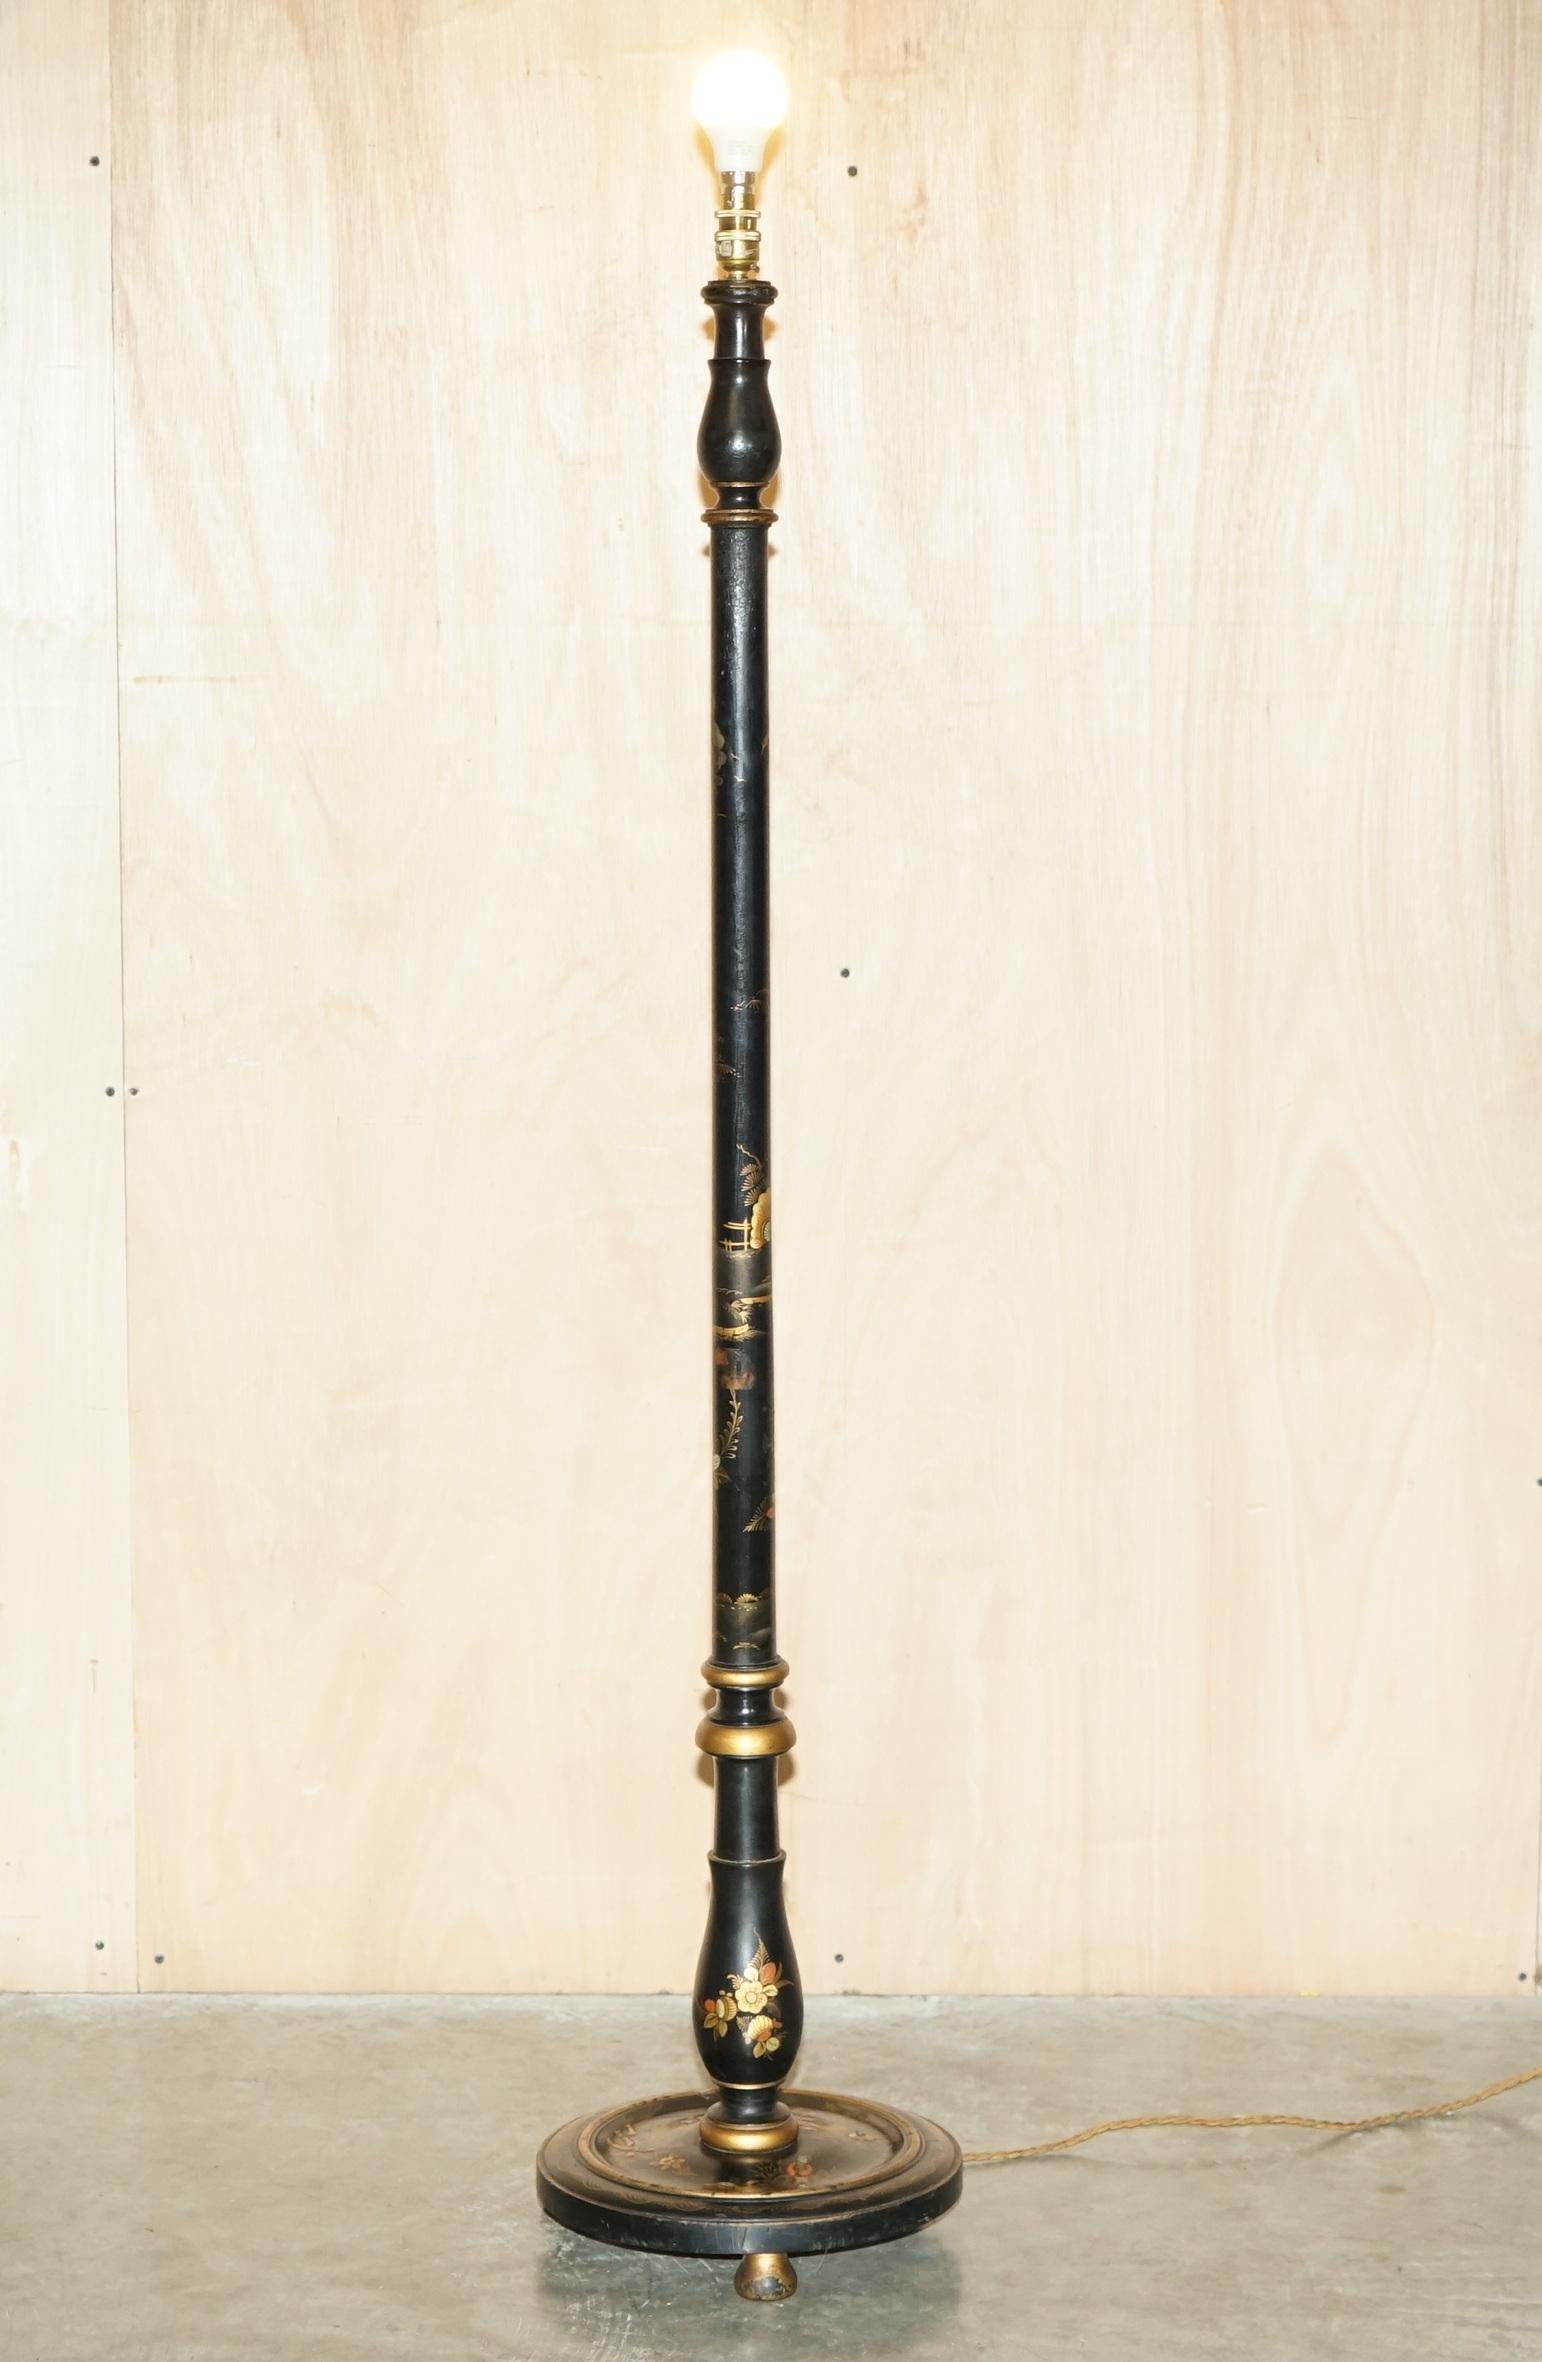 Royal House Antiques

Royal House Antiques is delighted to offer for sale this very rare hand painted and lacquered Chinese Export circa 1920's Chinoiserie floor standing lamp

Please note the delivery fee listed is just a guide, it covers within